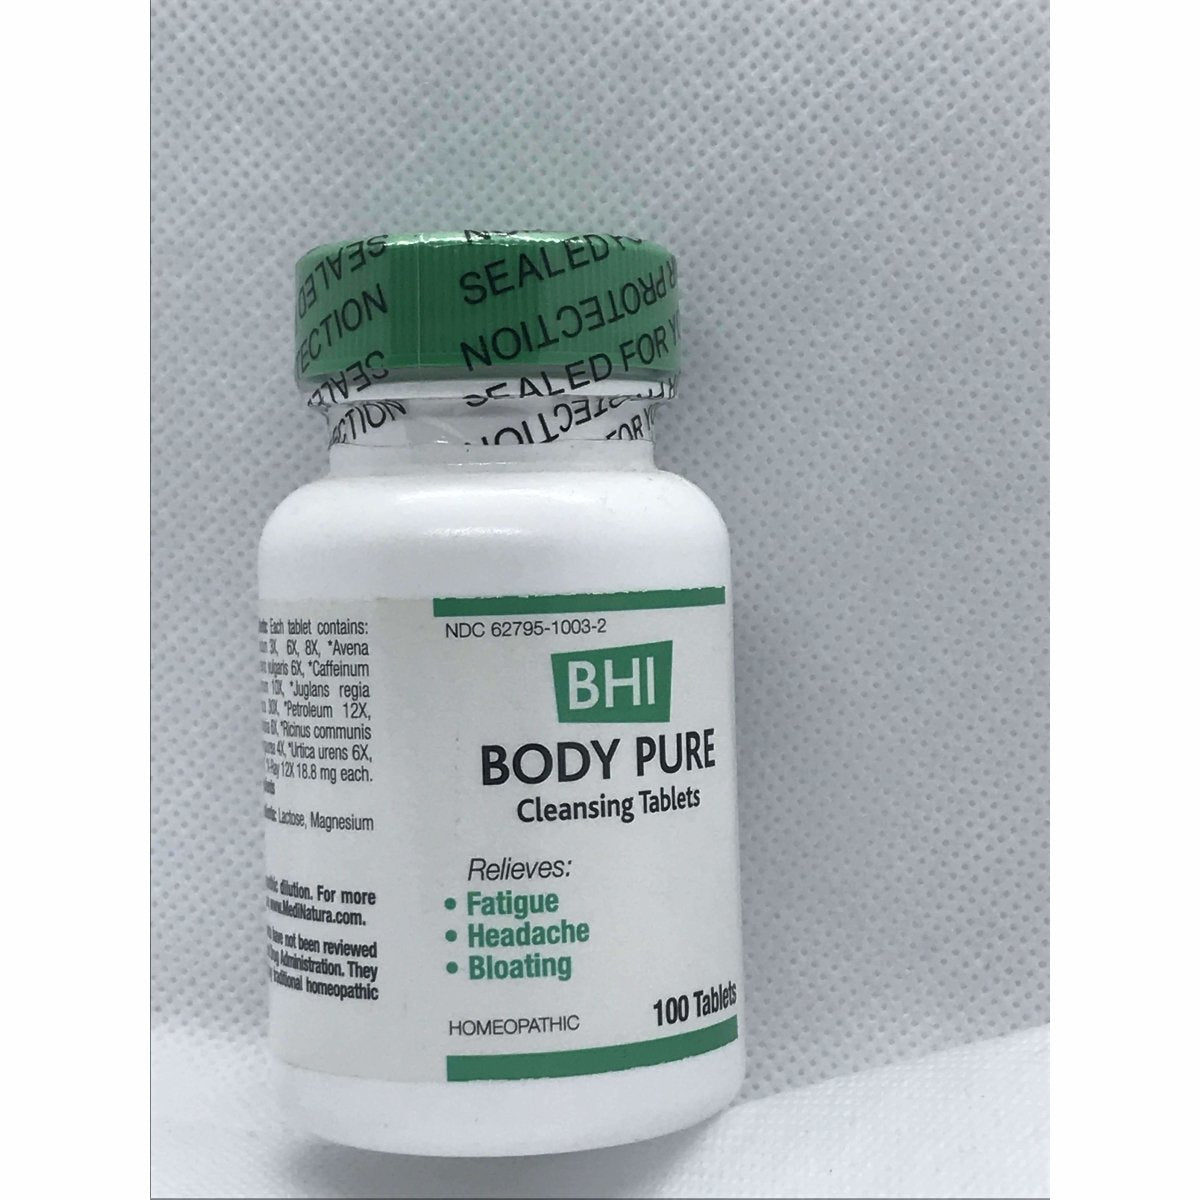 BHI Body Pure Cleansing Tablets 100 Tablets